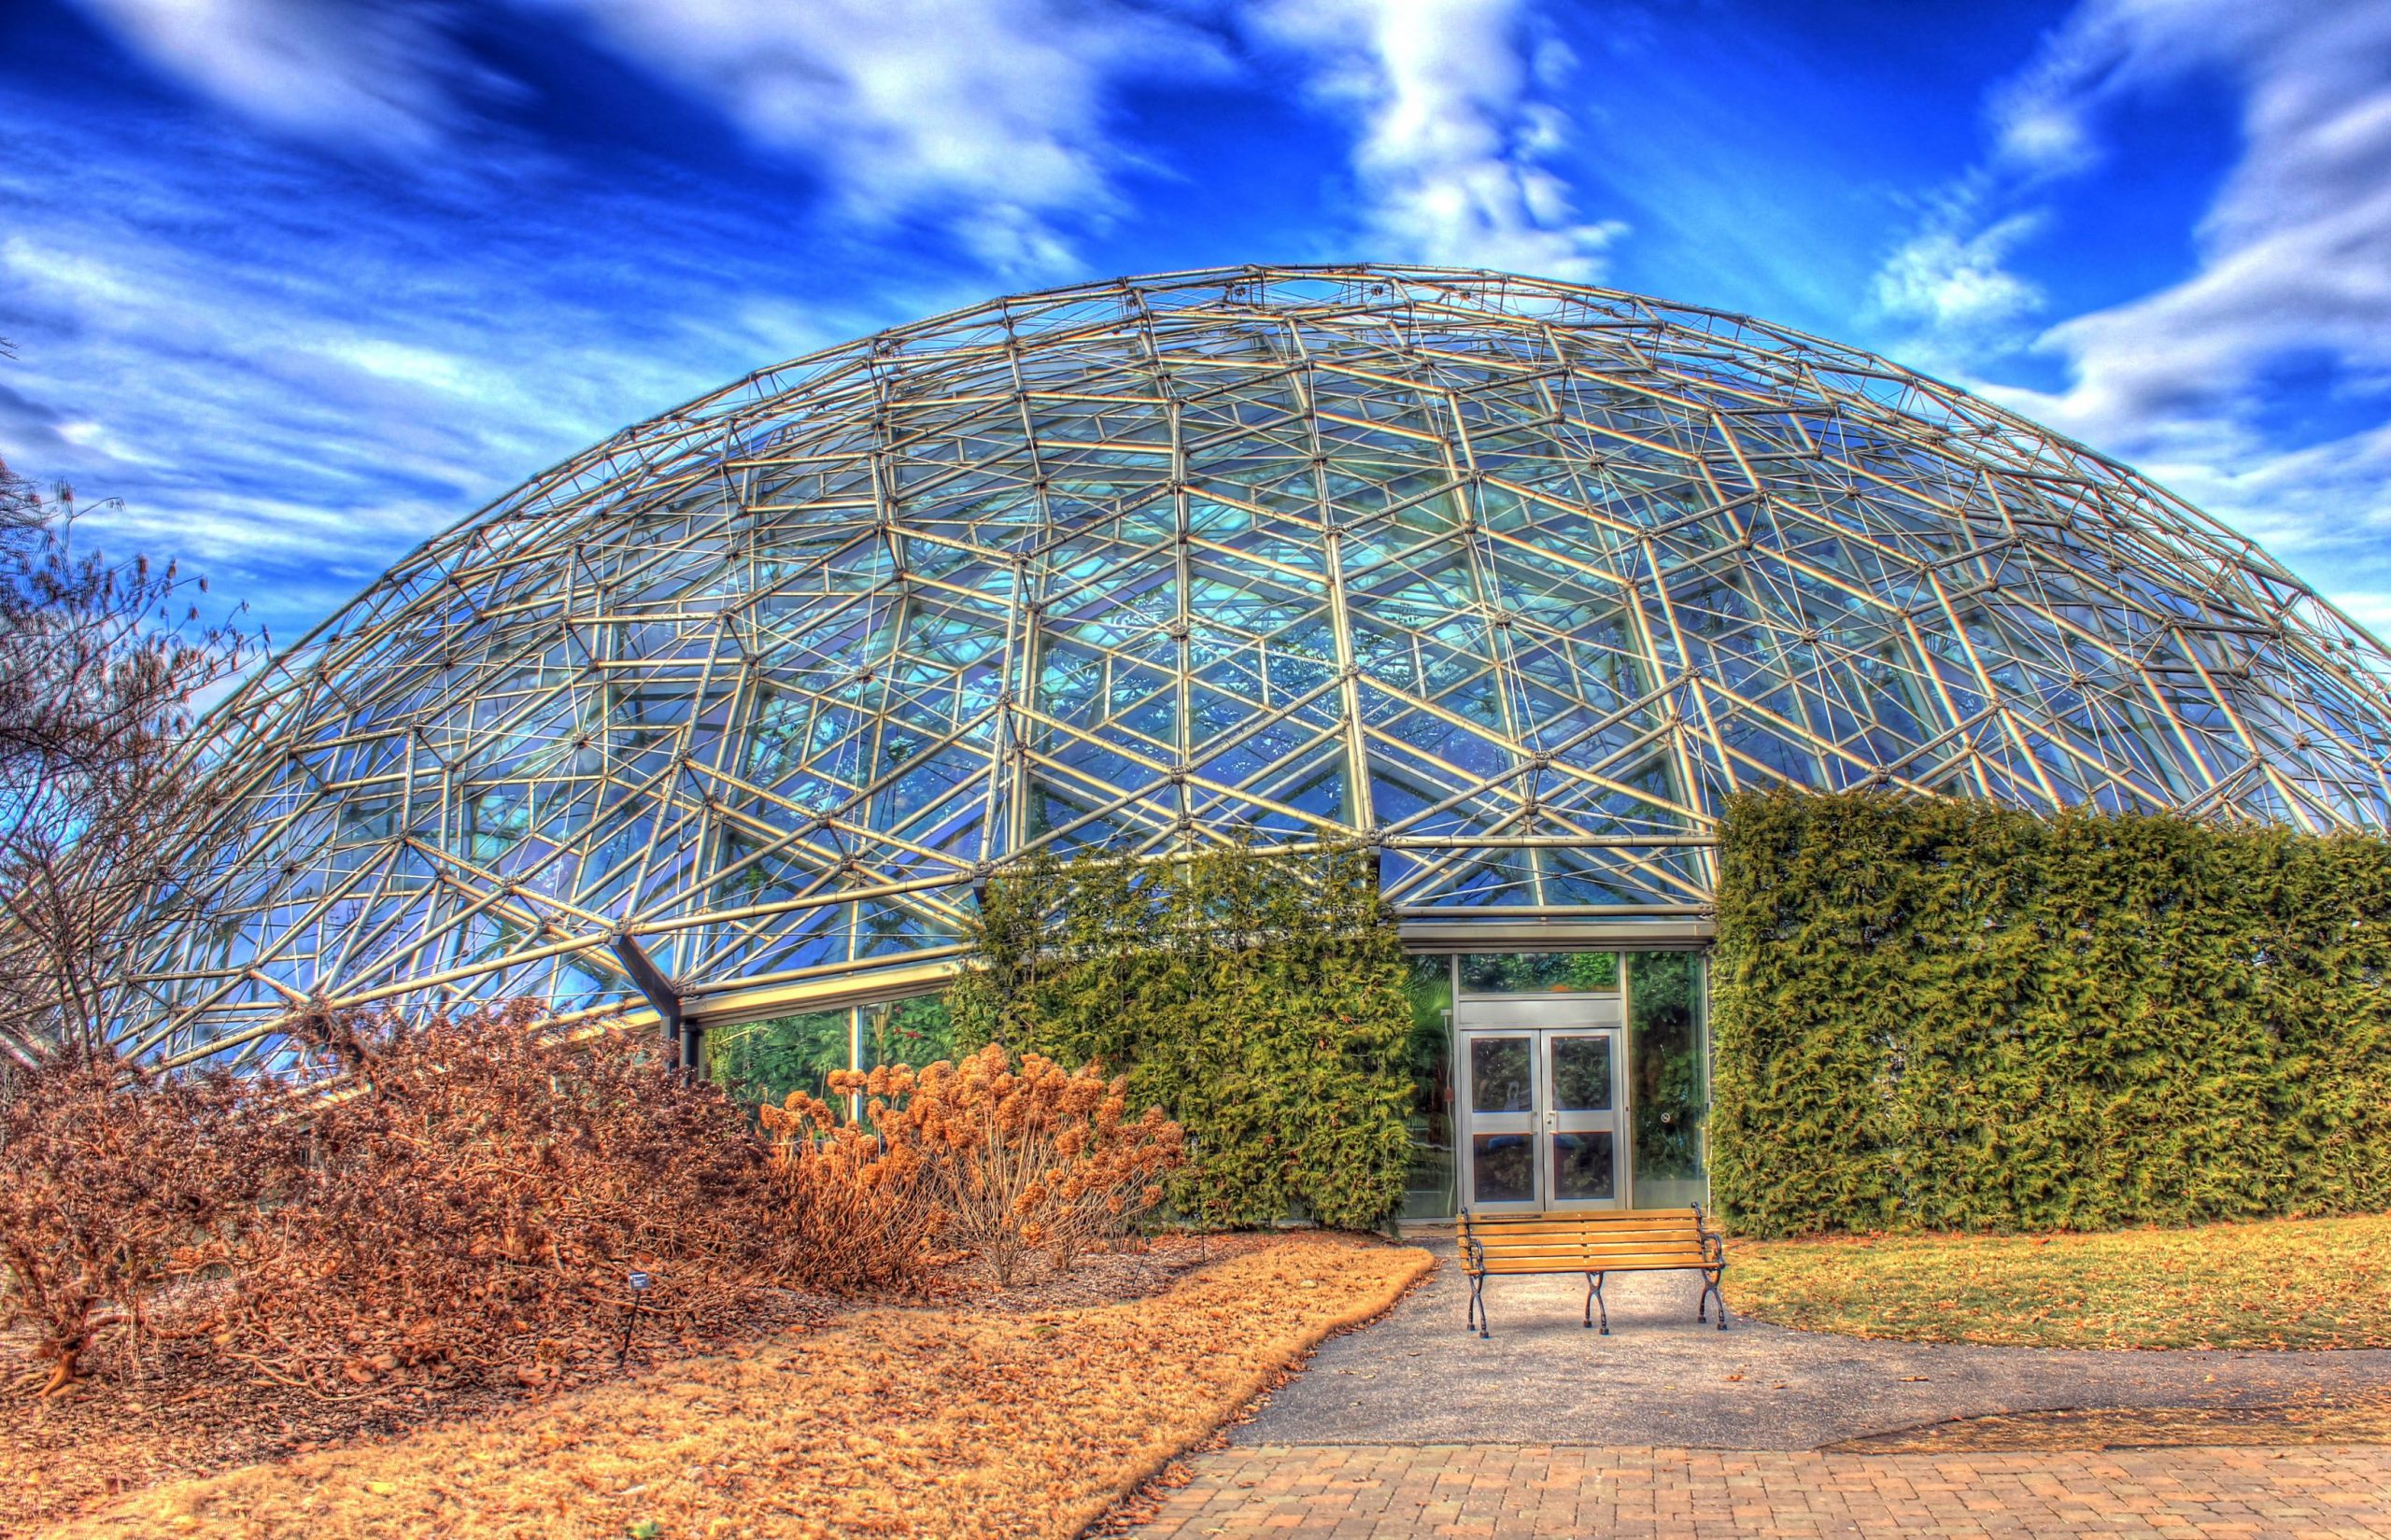 What Exactly Is a Botanical Garden and Why Should You Visit One?